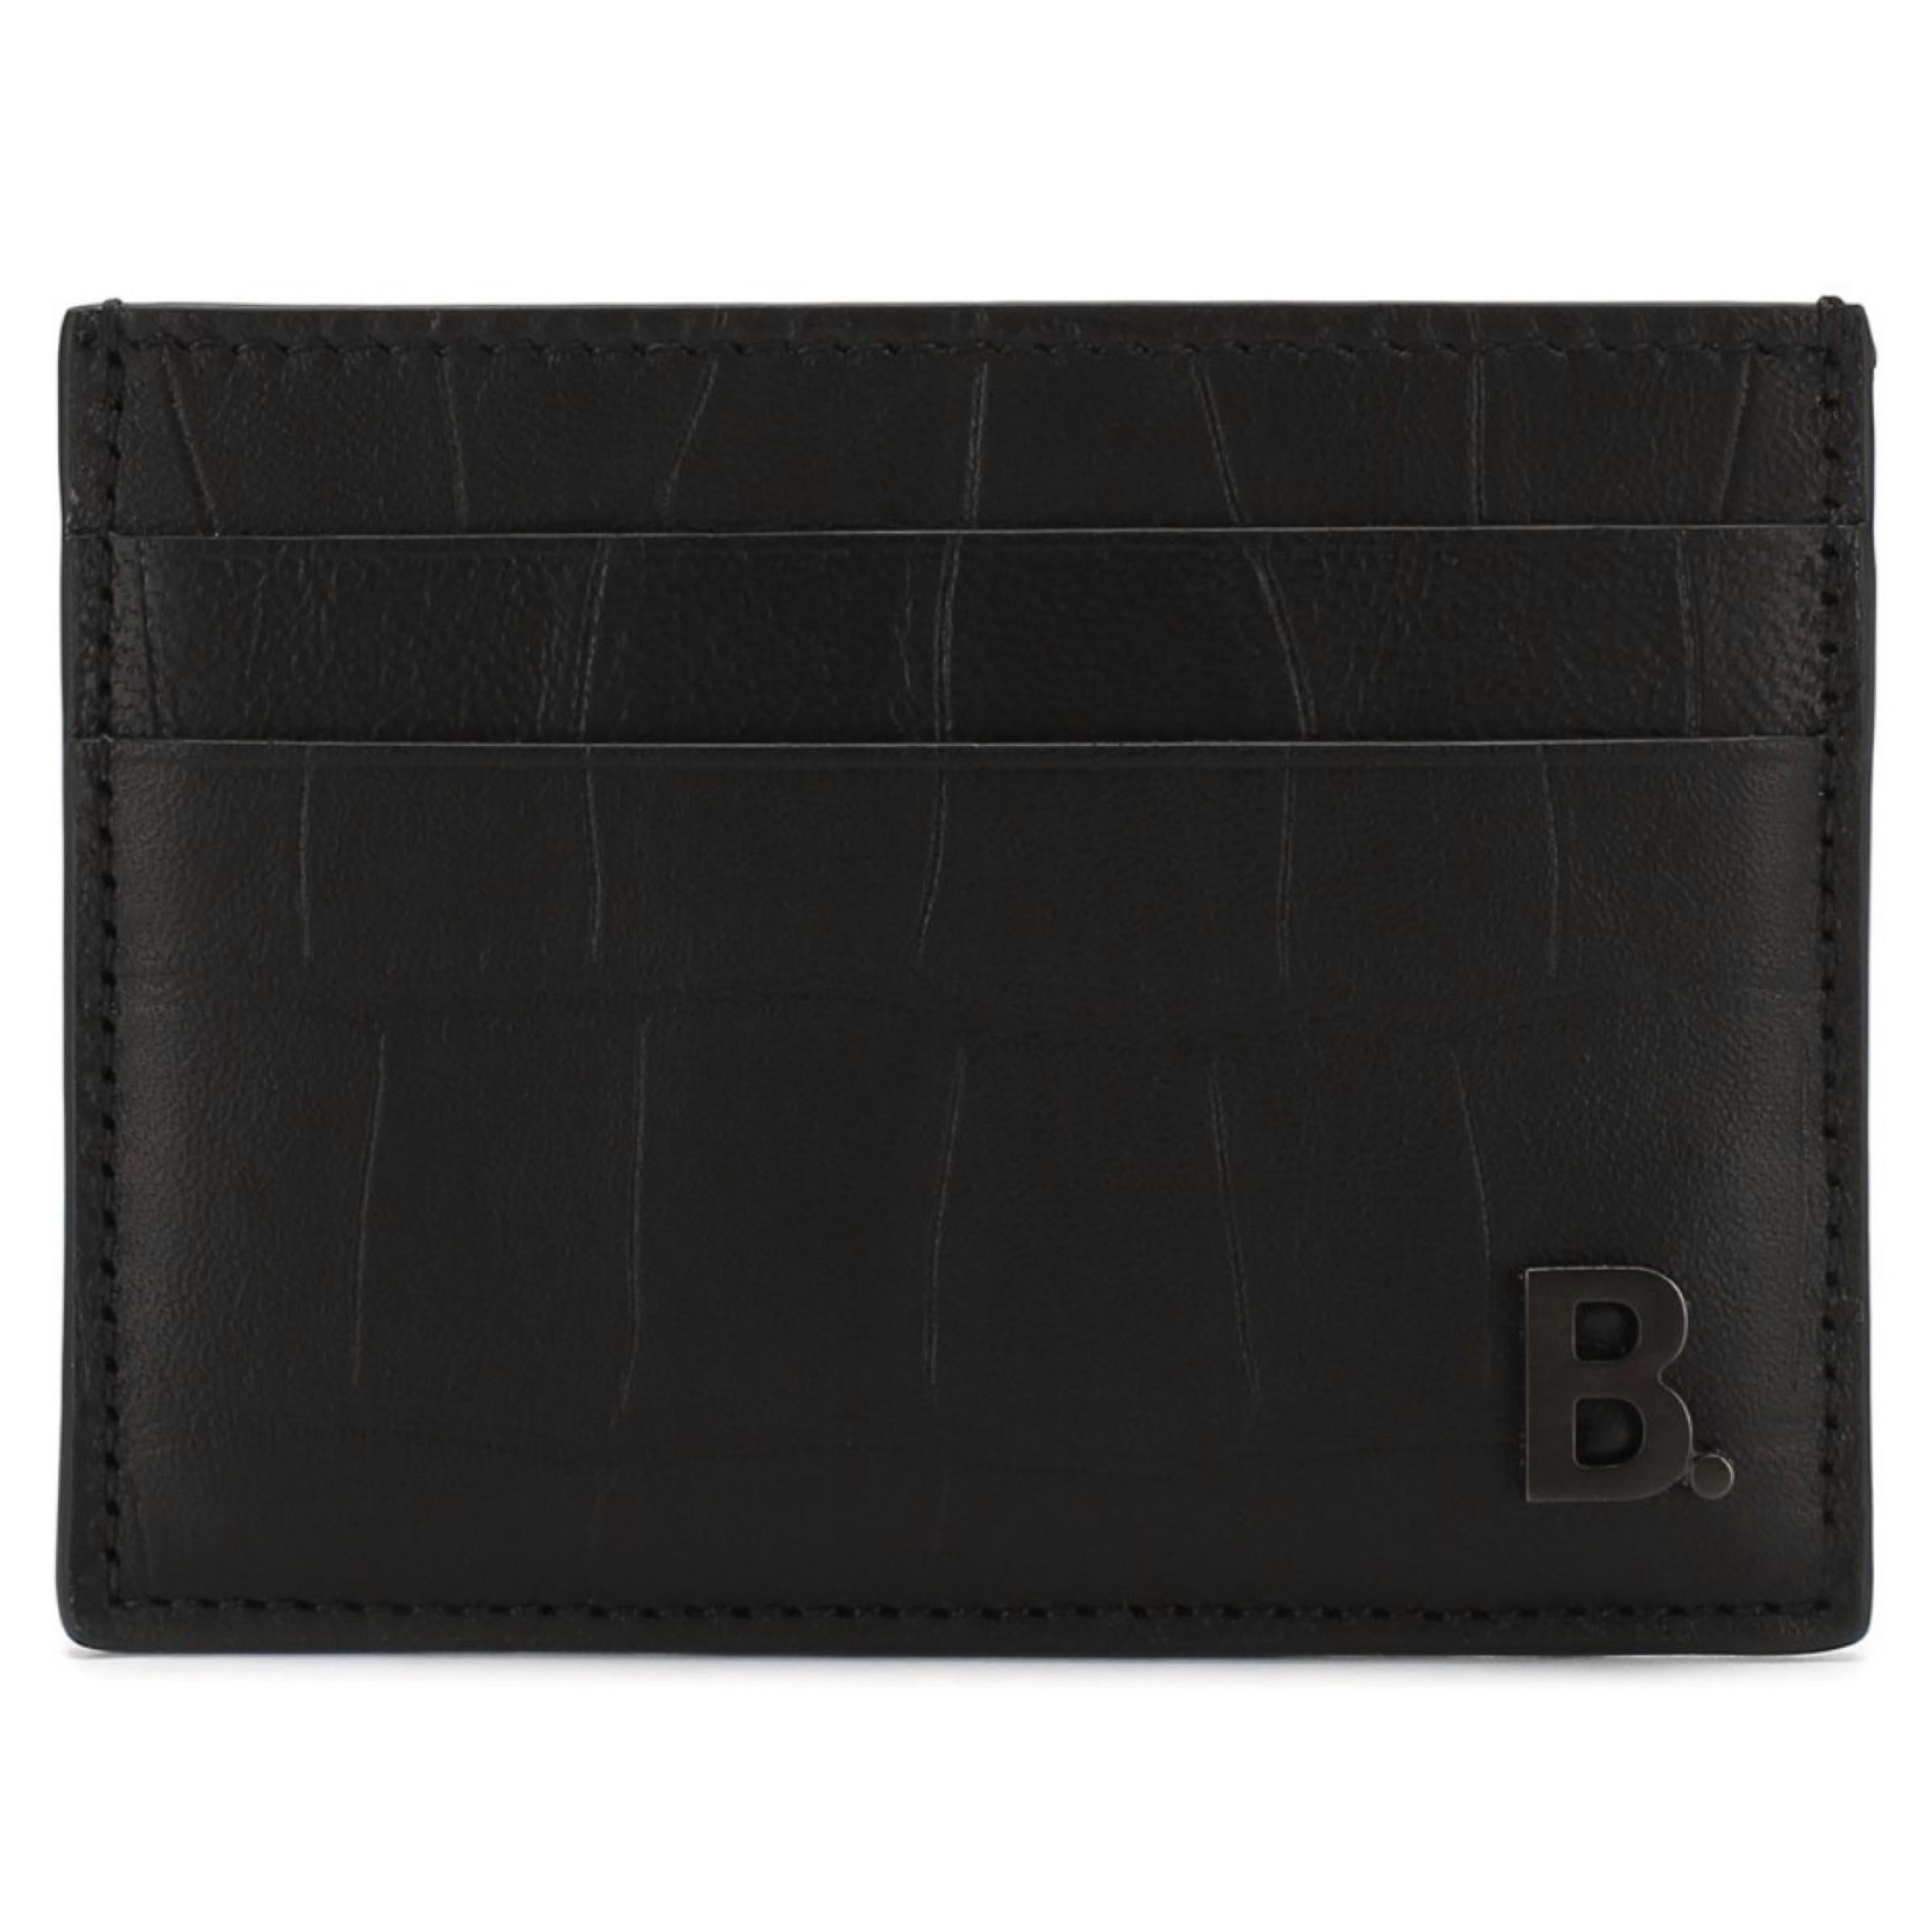 New Balenciaga Black B Logo Crocodile Skin Embossed Leather Card Holder Wallet

Authenticity guaranteed

DETAILS
Brand: Balenciaga
Condition: Brand new
Gender: Unisex
Category: Wallet
Color: Black
Material: Leather
B logo plaque
Crocodile skin